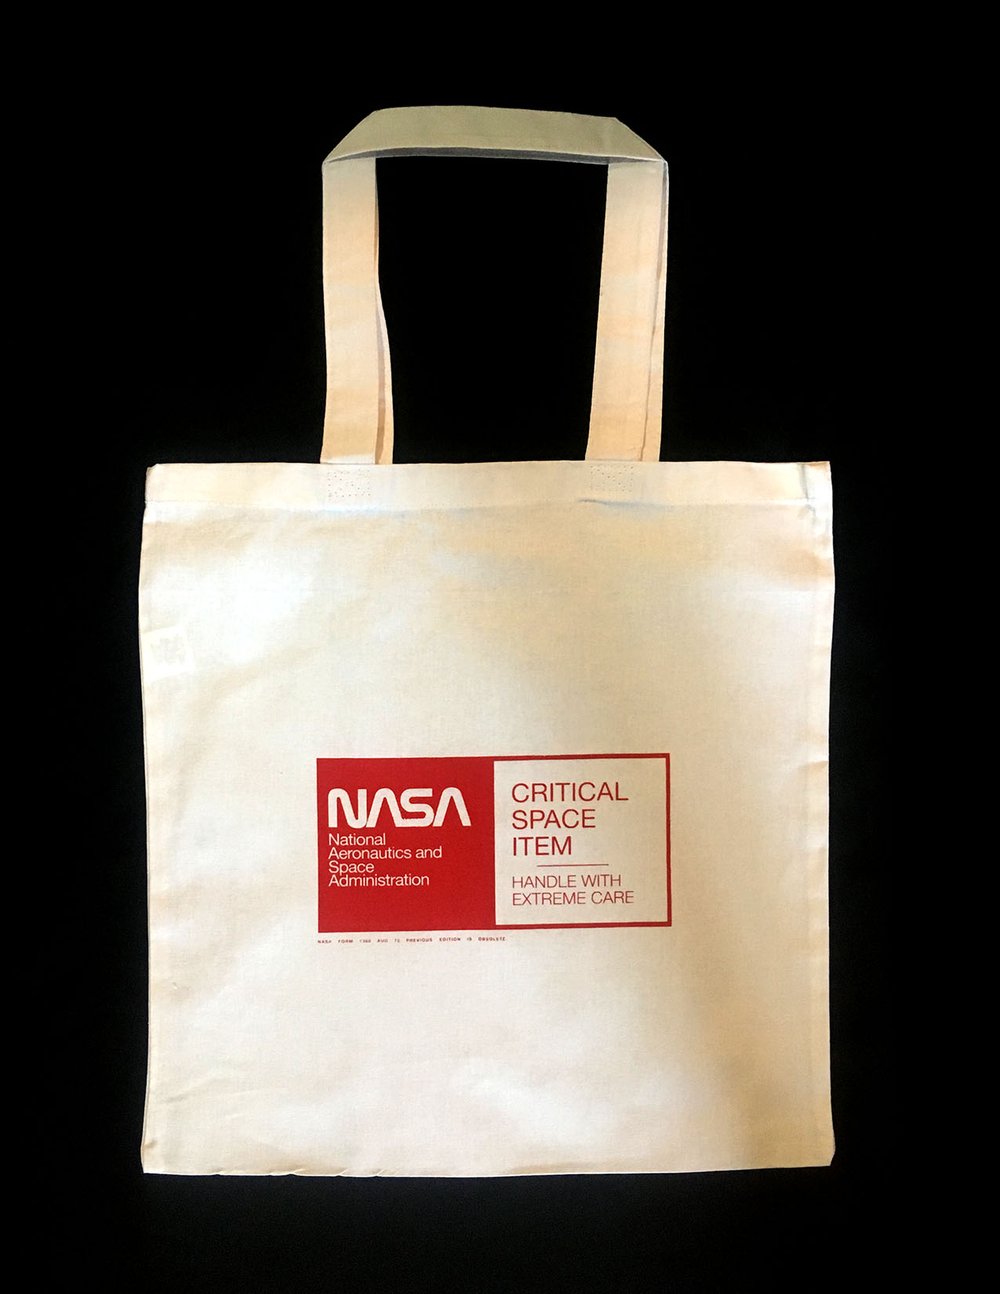 Image of Critical space item tote bag